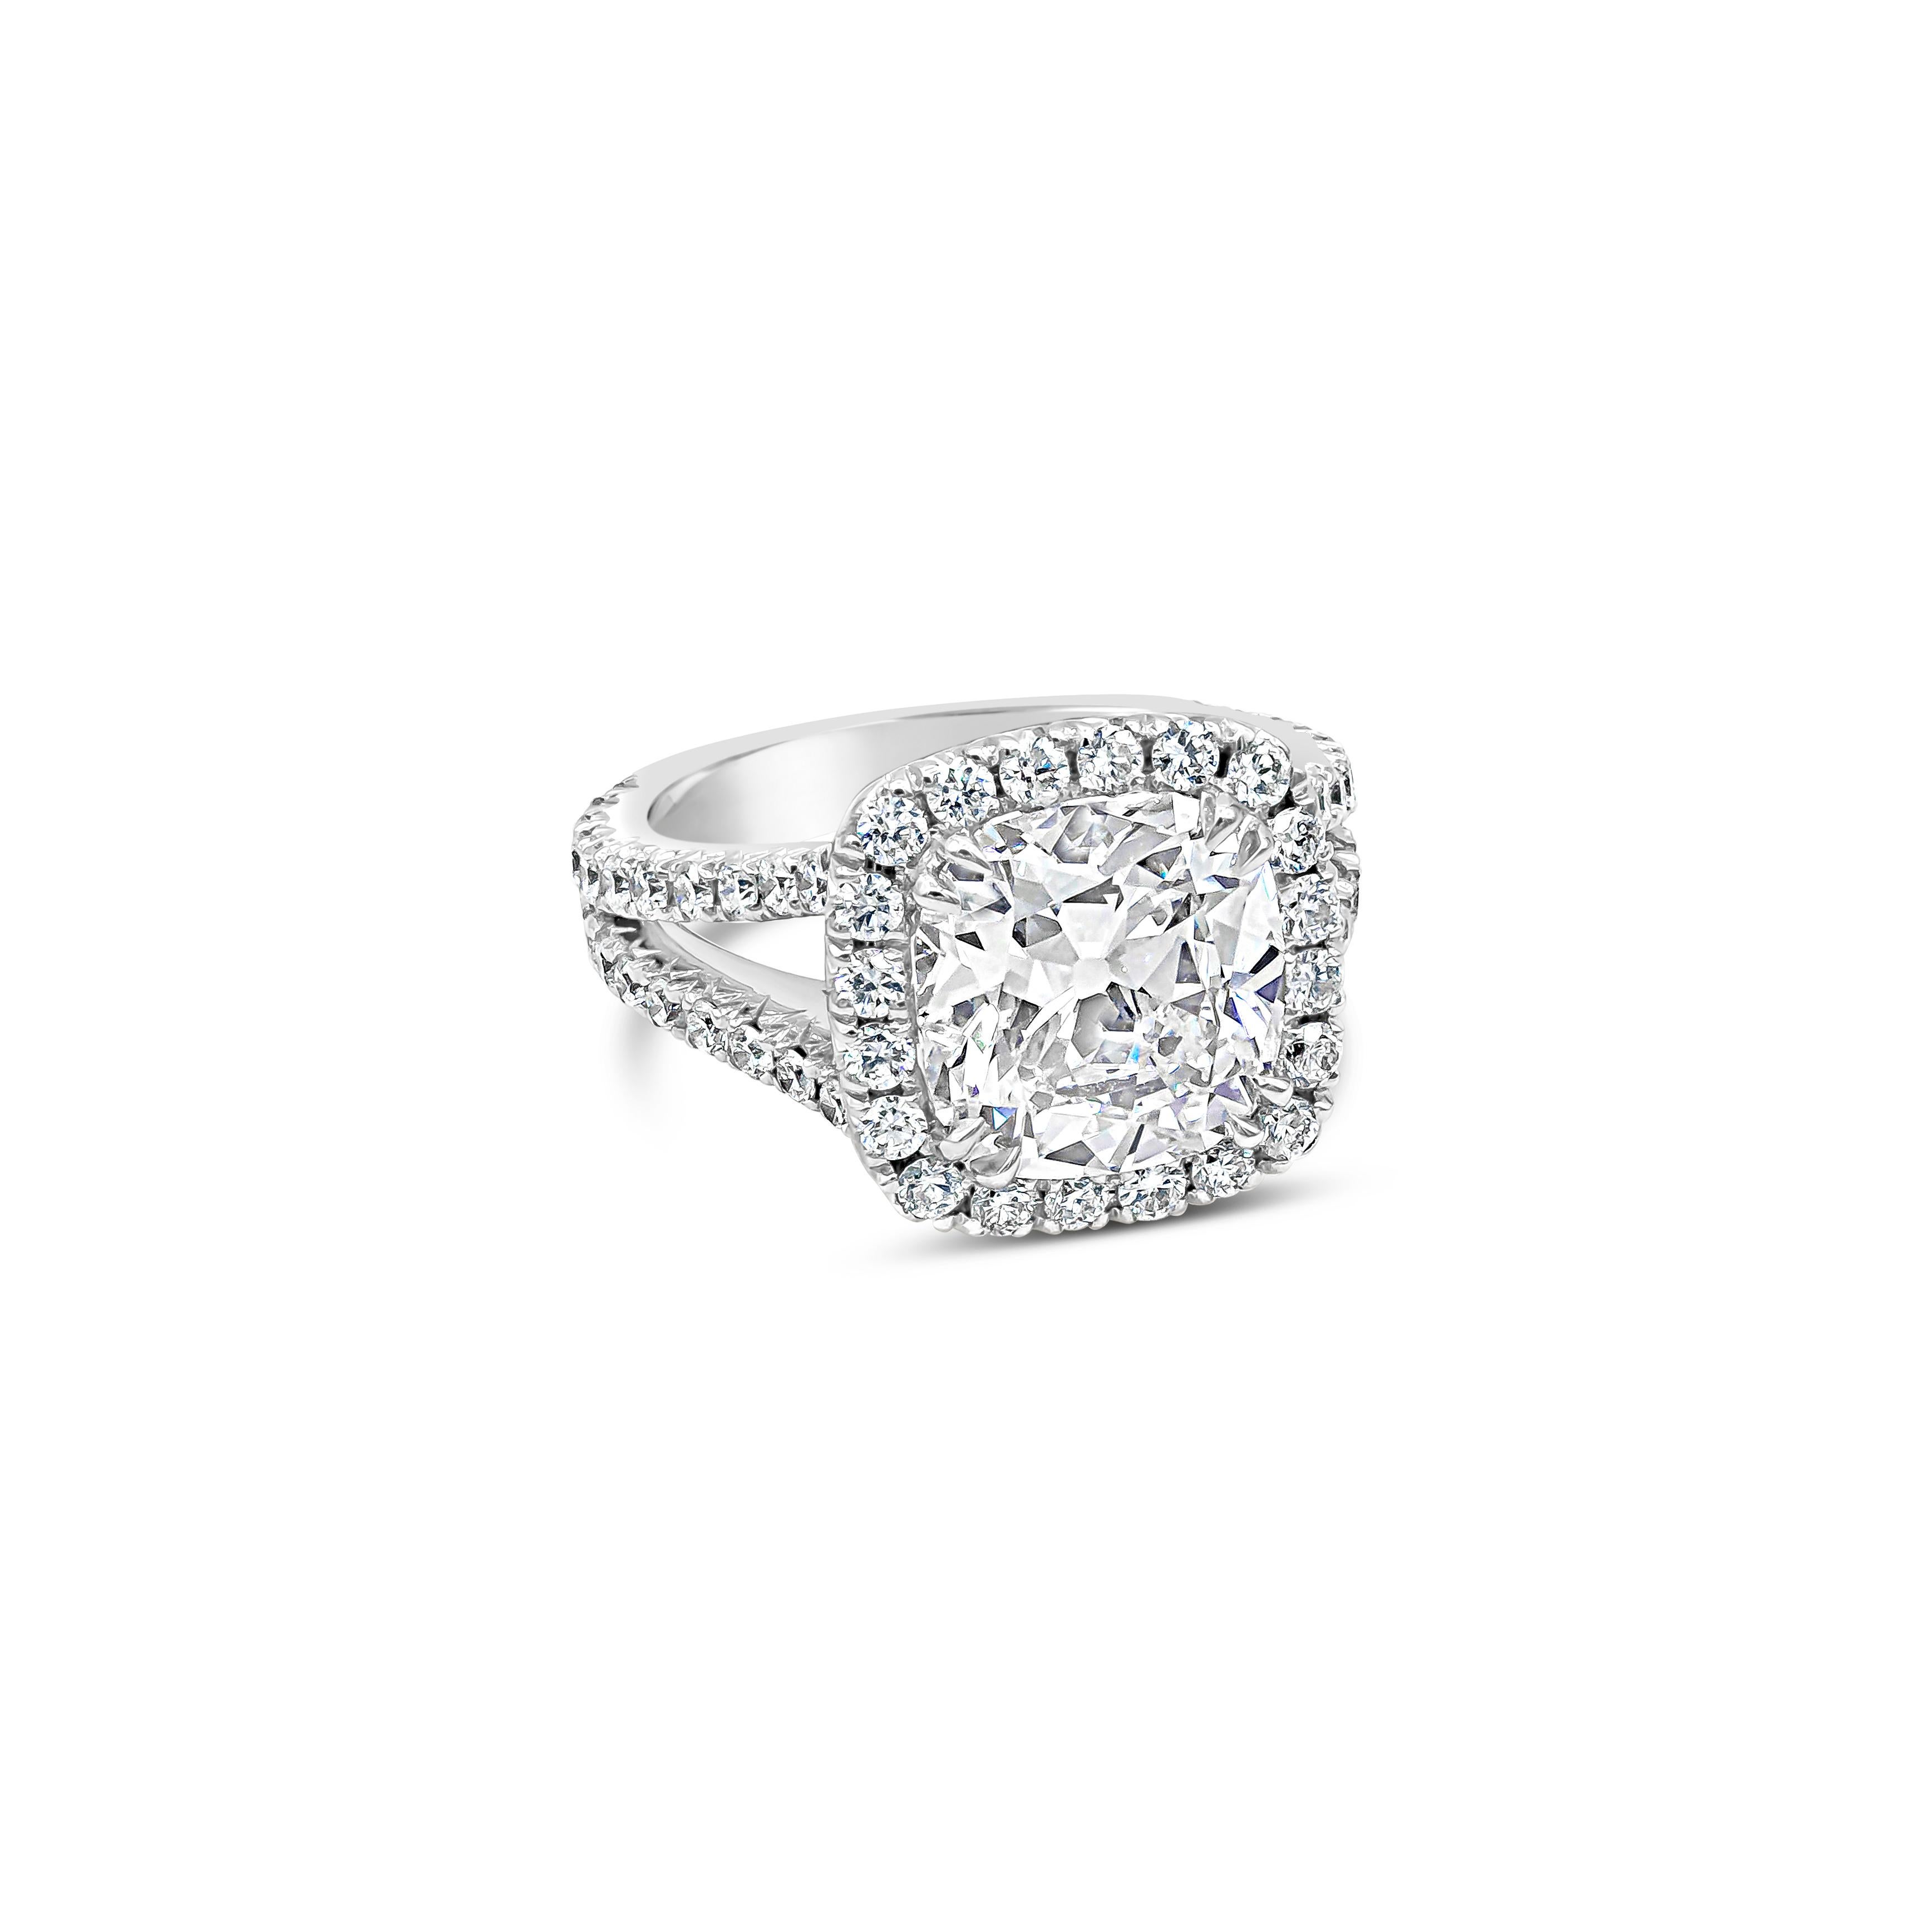 This elegant and vibrant halo engagement ring featuring 4.11 carat cushion cut diamond certified by GIA as G color and SI1 in clarity. Surrounded by a single row of round brilliant diamonds. Set on an accented split-shank band made in 18 karat white